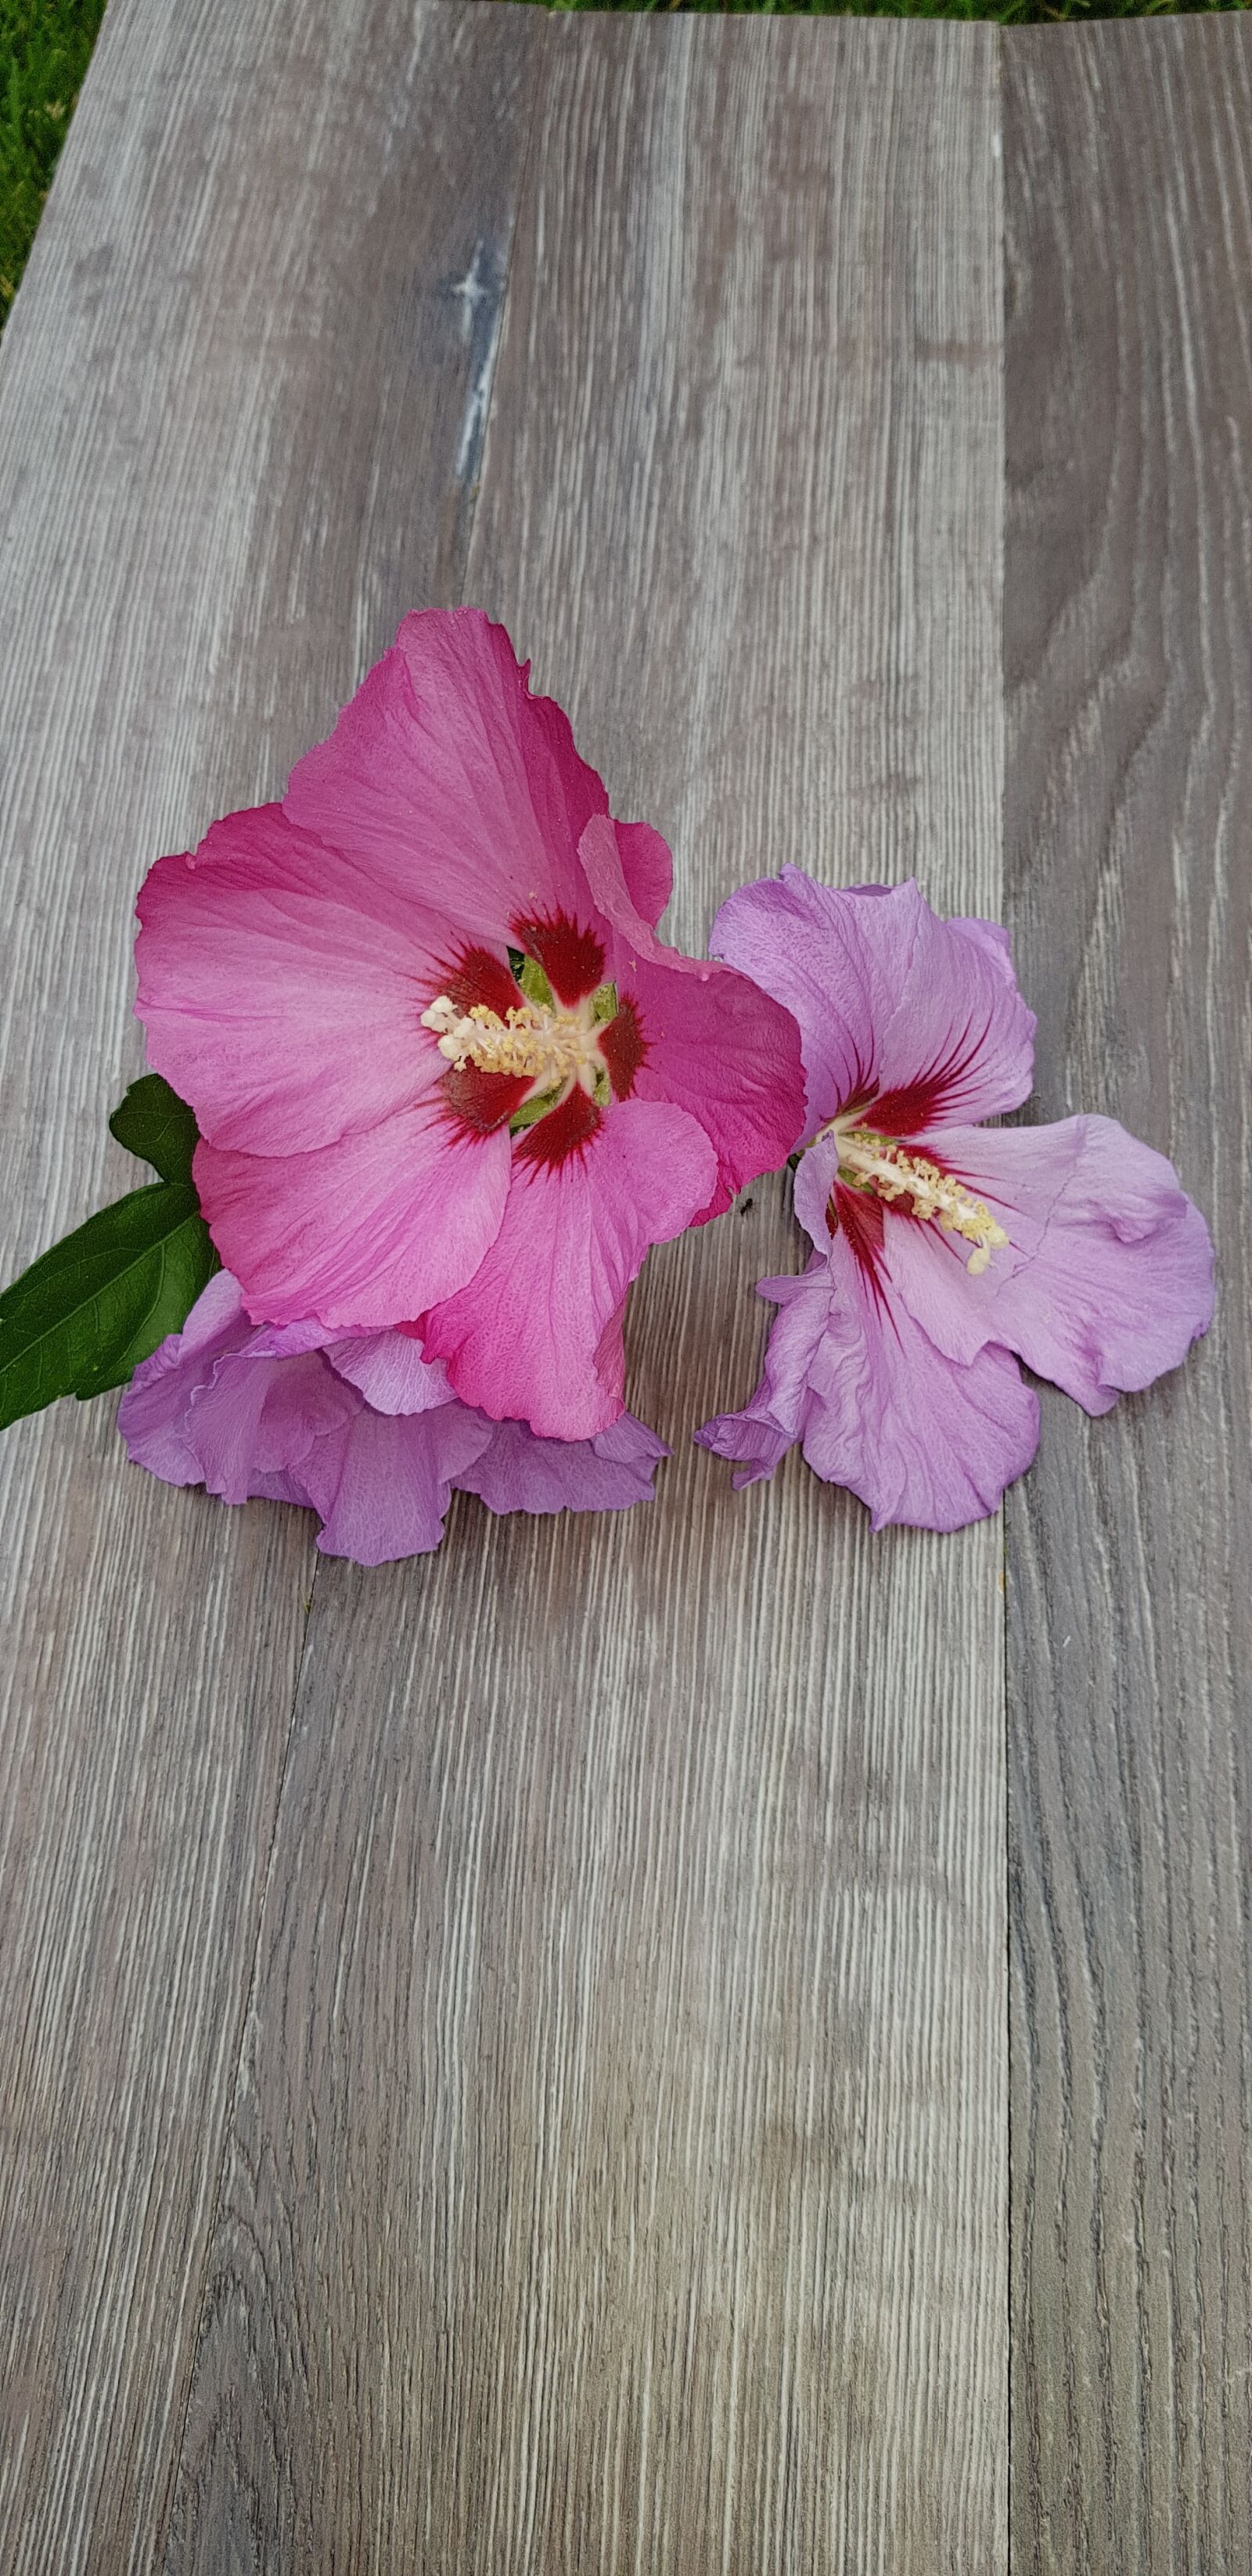 Samsung Galaxy S8+ sample photo. Flowers, hibiscus, wood photography